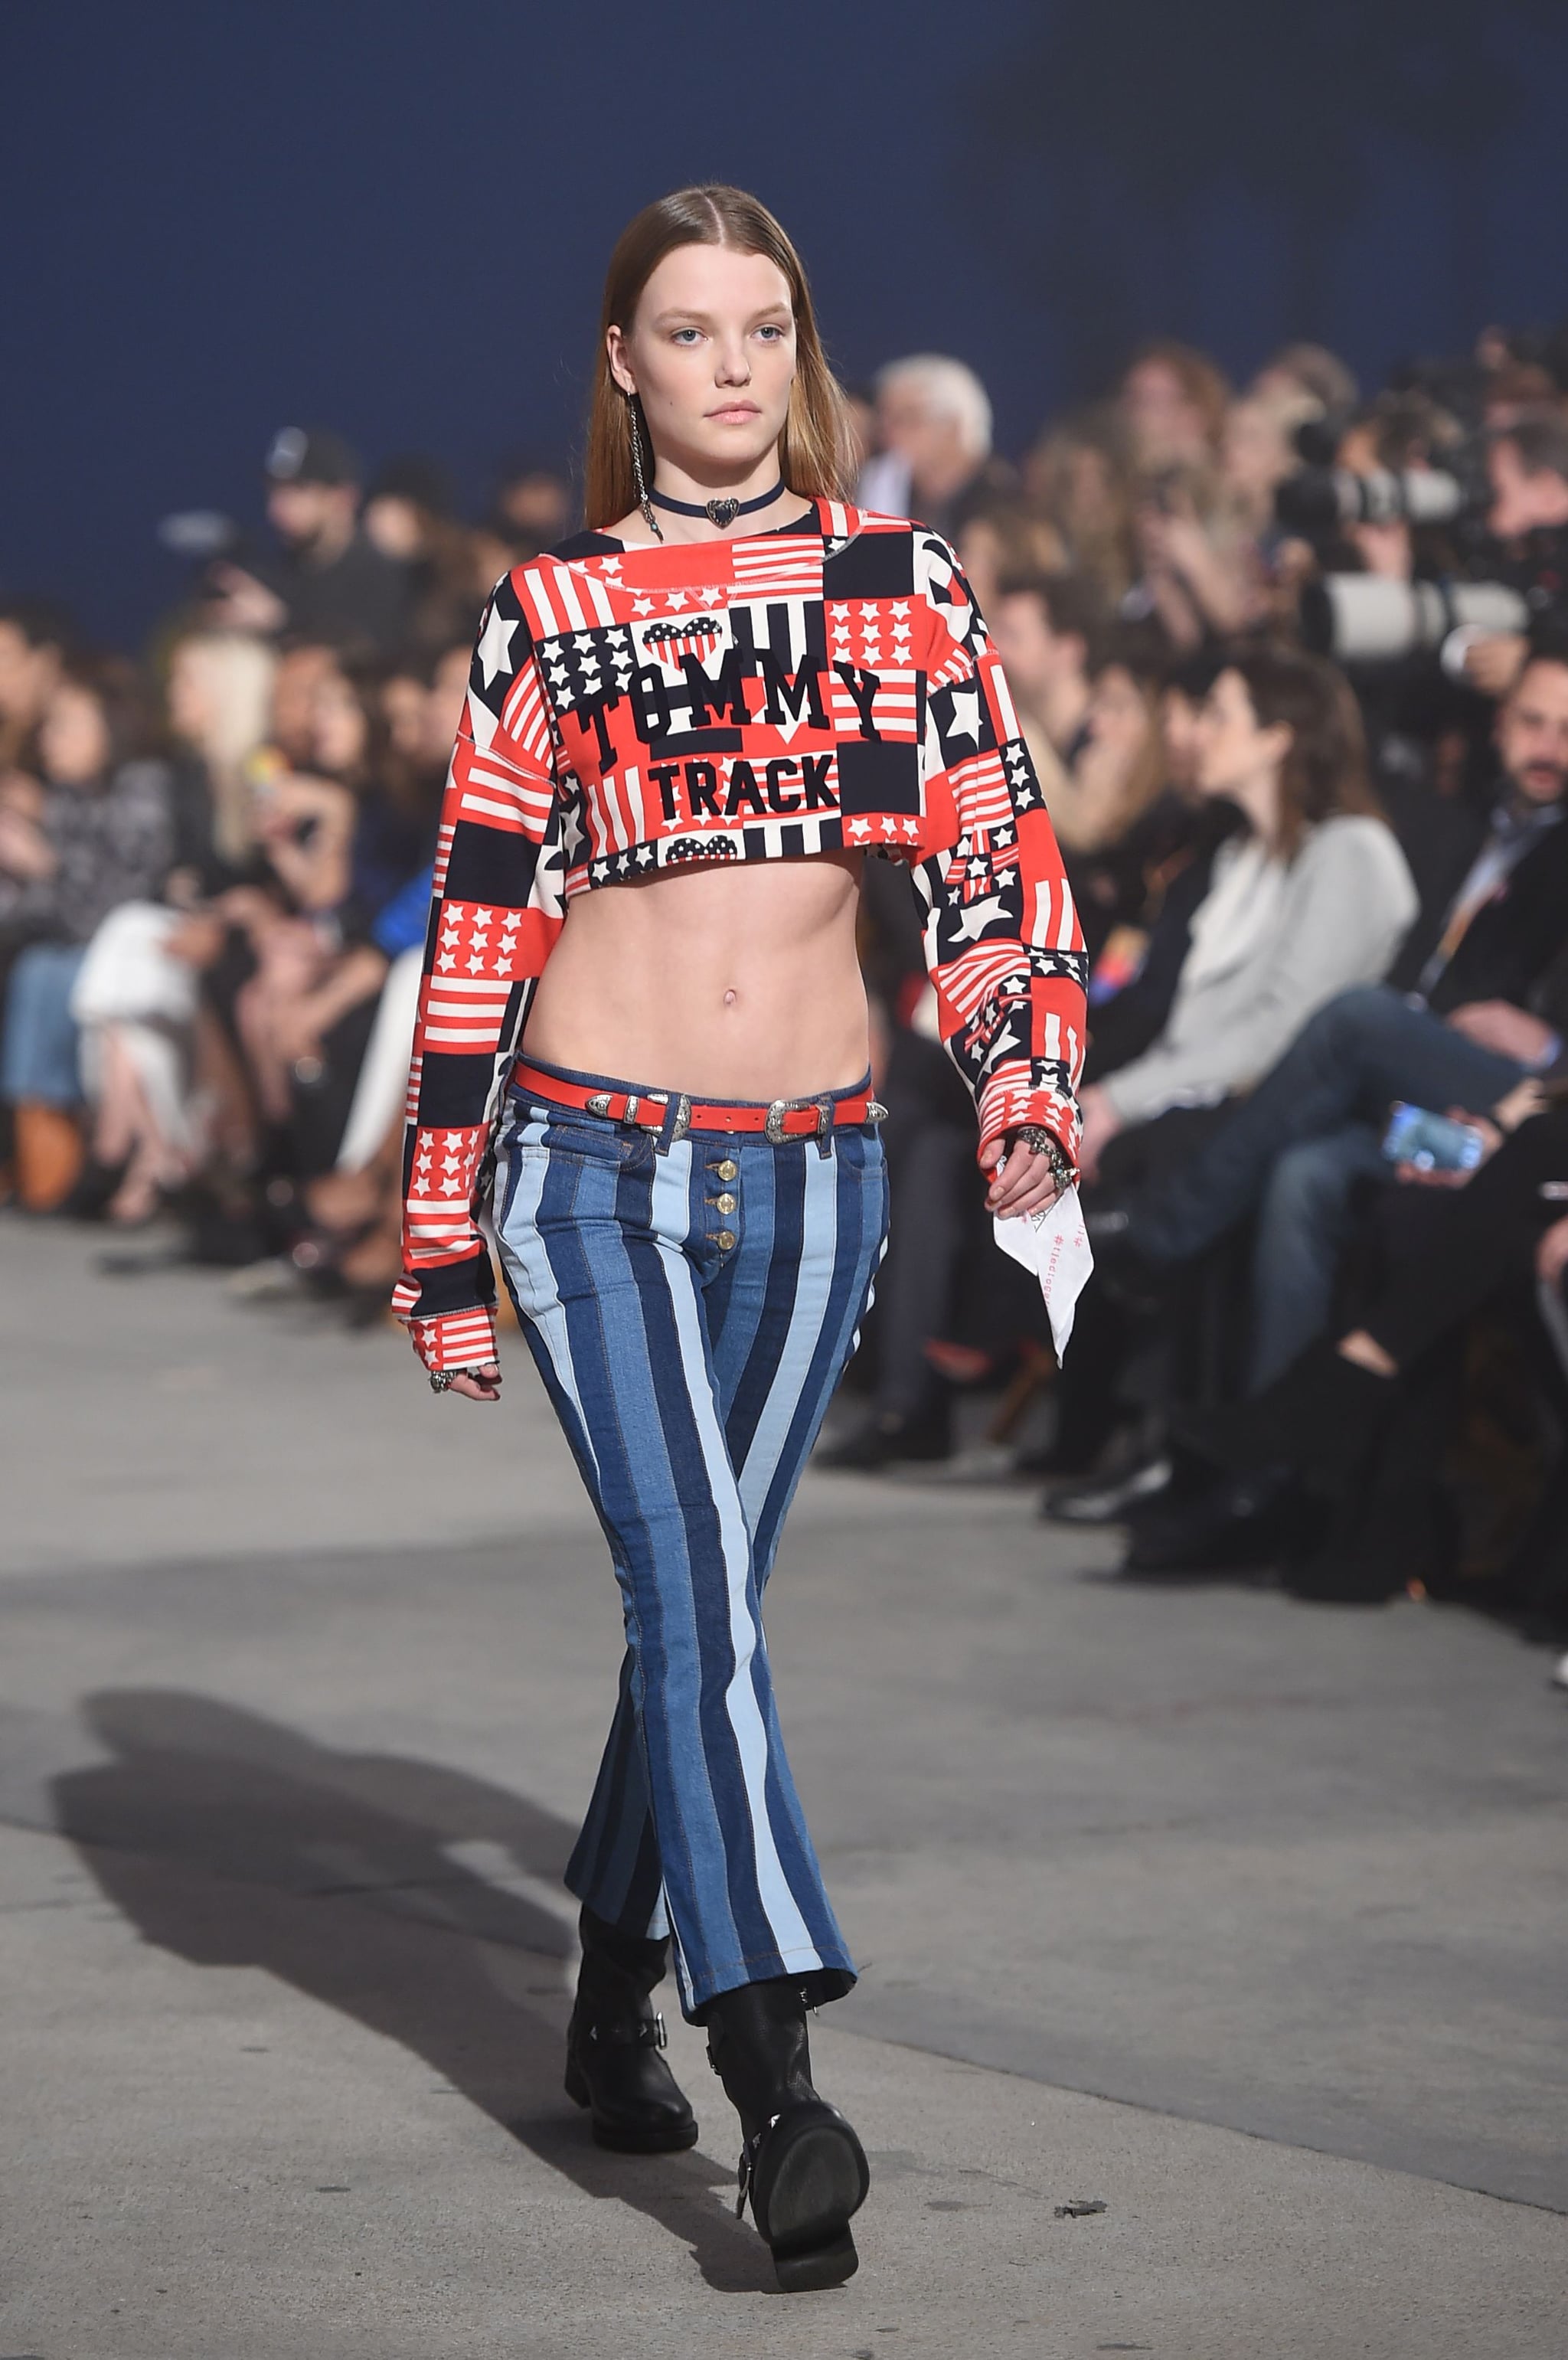 festspil Melting strejke Fashion, Shopping & Style | Tommy Hilfiger's Collection Confirms 2017 Looks  a Lot Like the Early 2000s | POPSUGAR Fashion Photo 25